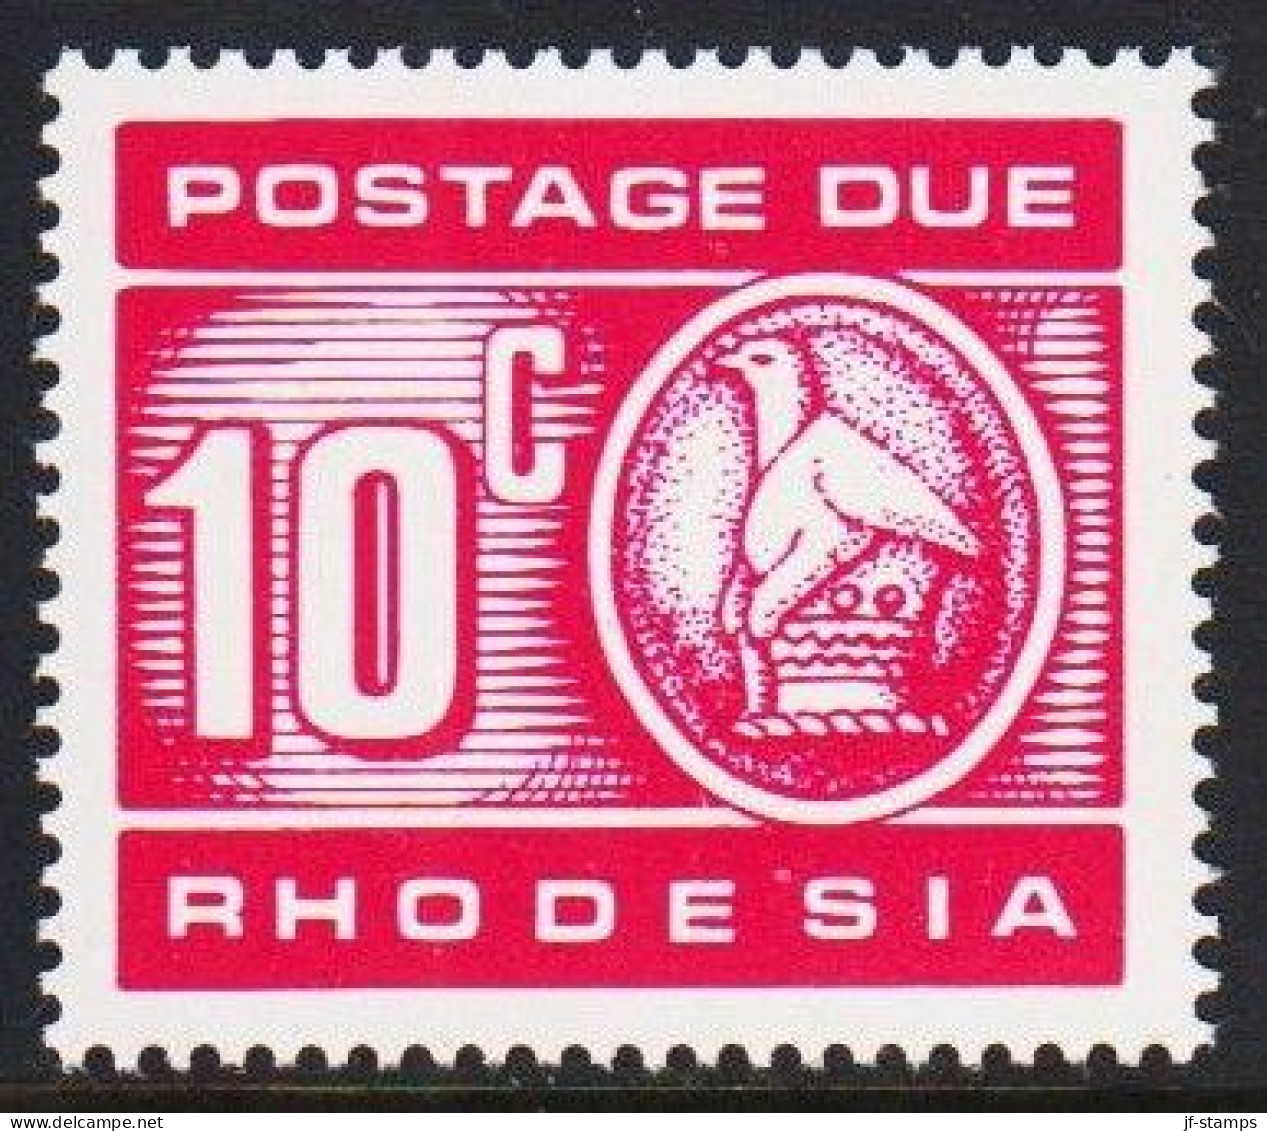 1970. RHODESIA. POSTAGE DUE 10c Never Hinged. (Michel Porto 15) - JF545290 - Rodesia (1964-1980)